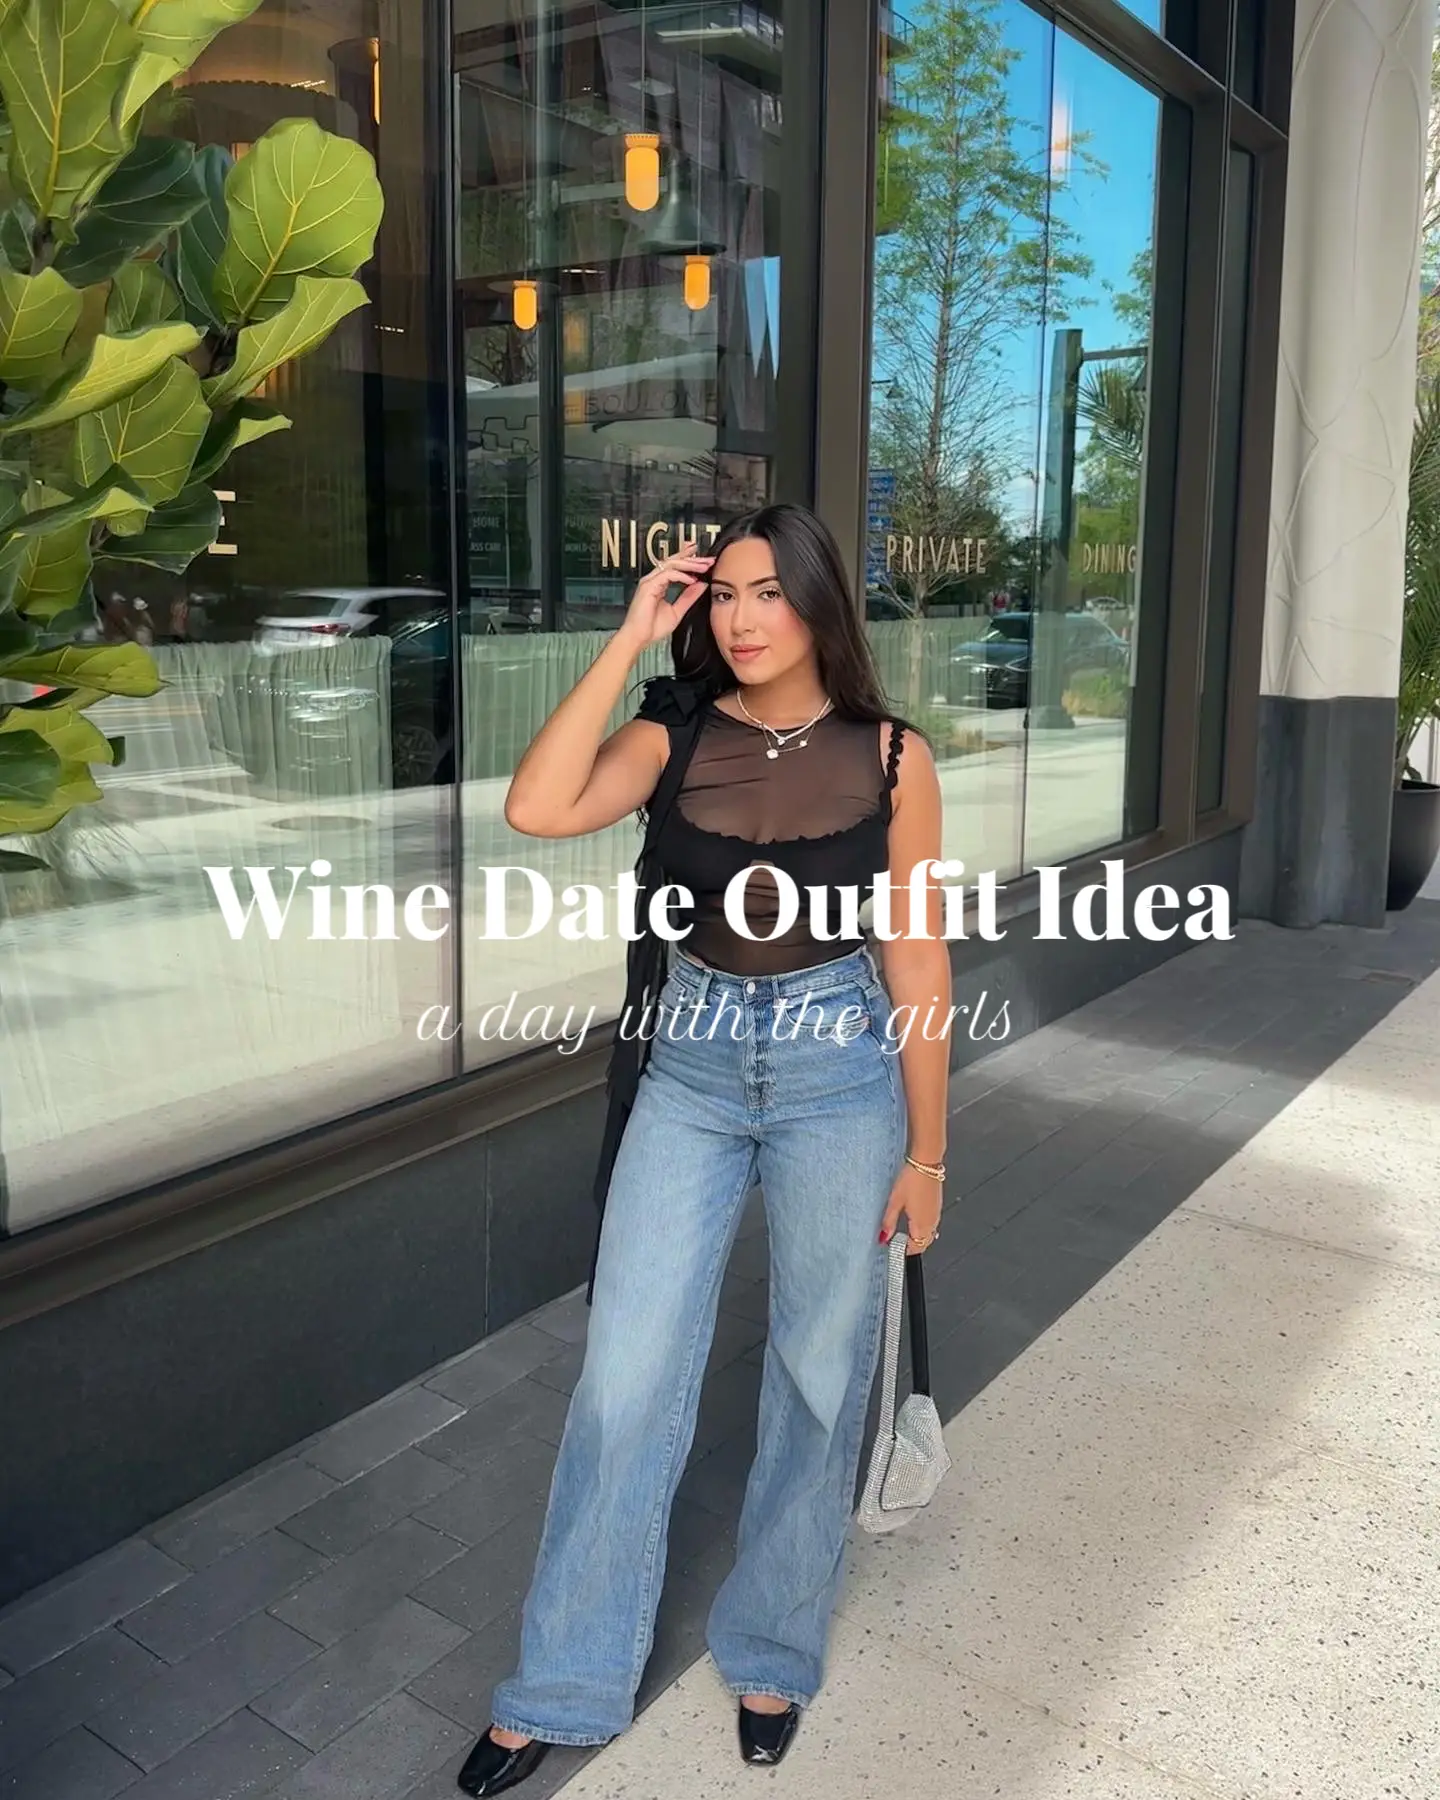 FIRST DATE OUTFIT IDEA 🍝, Gallery posted by Kylie Pitt